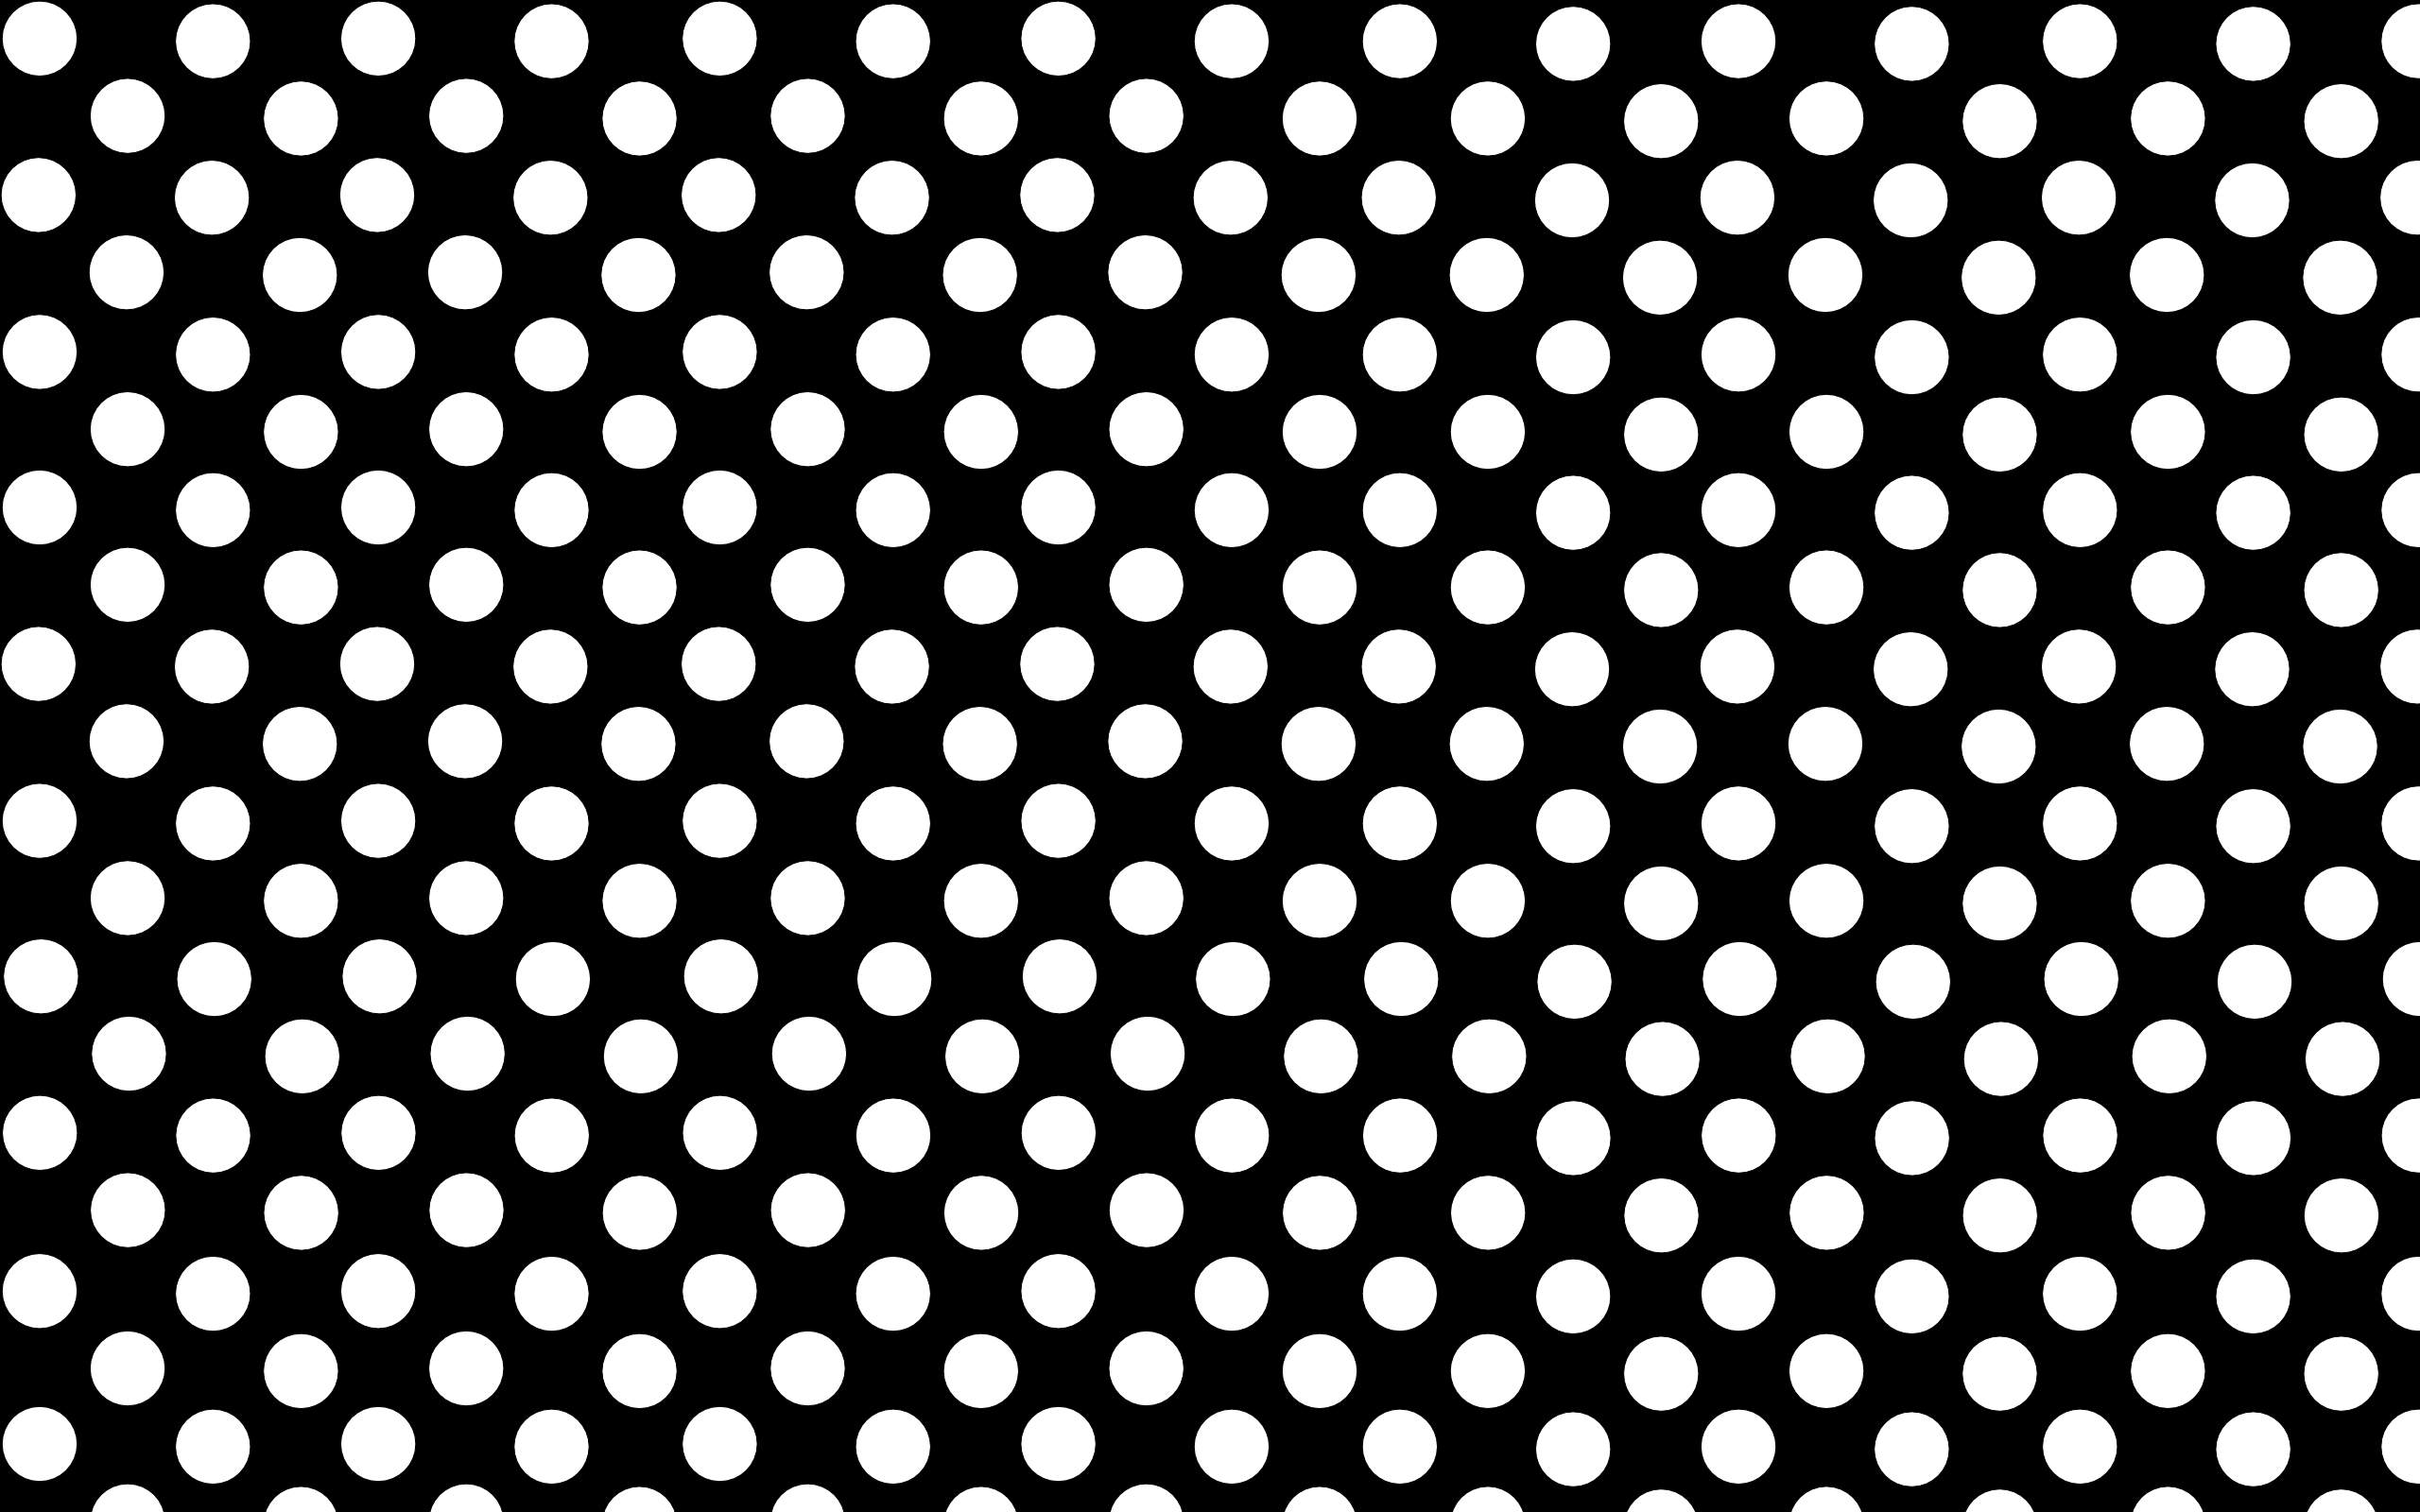 Wallpaper Polka Dots In Black and White Picture Photo